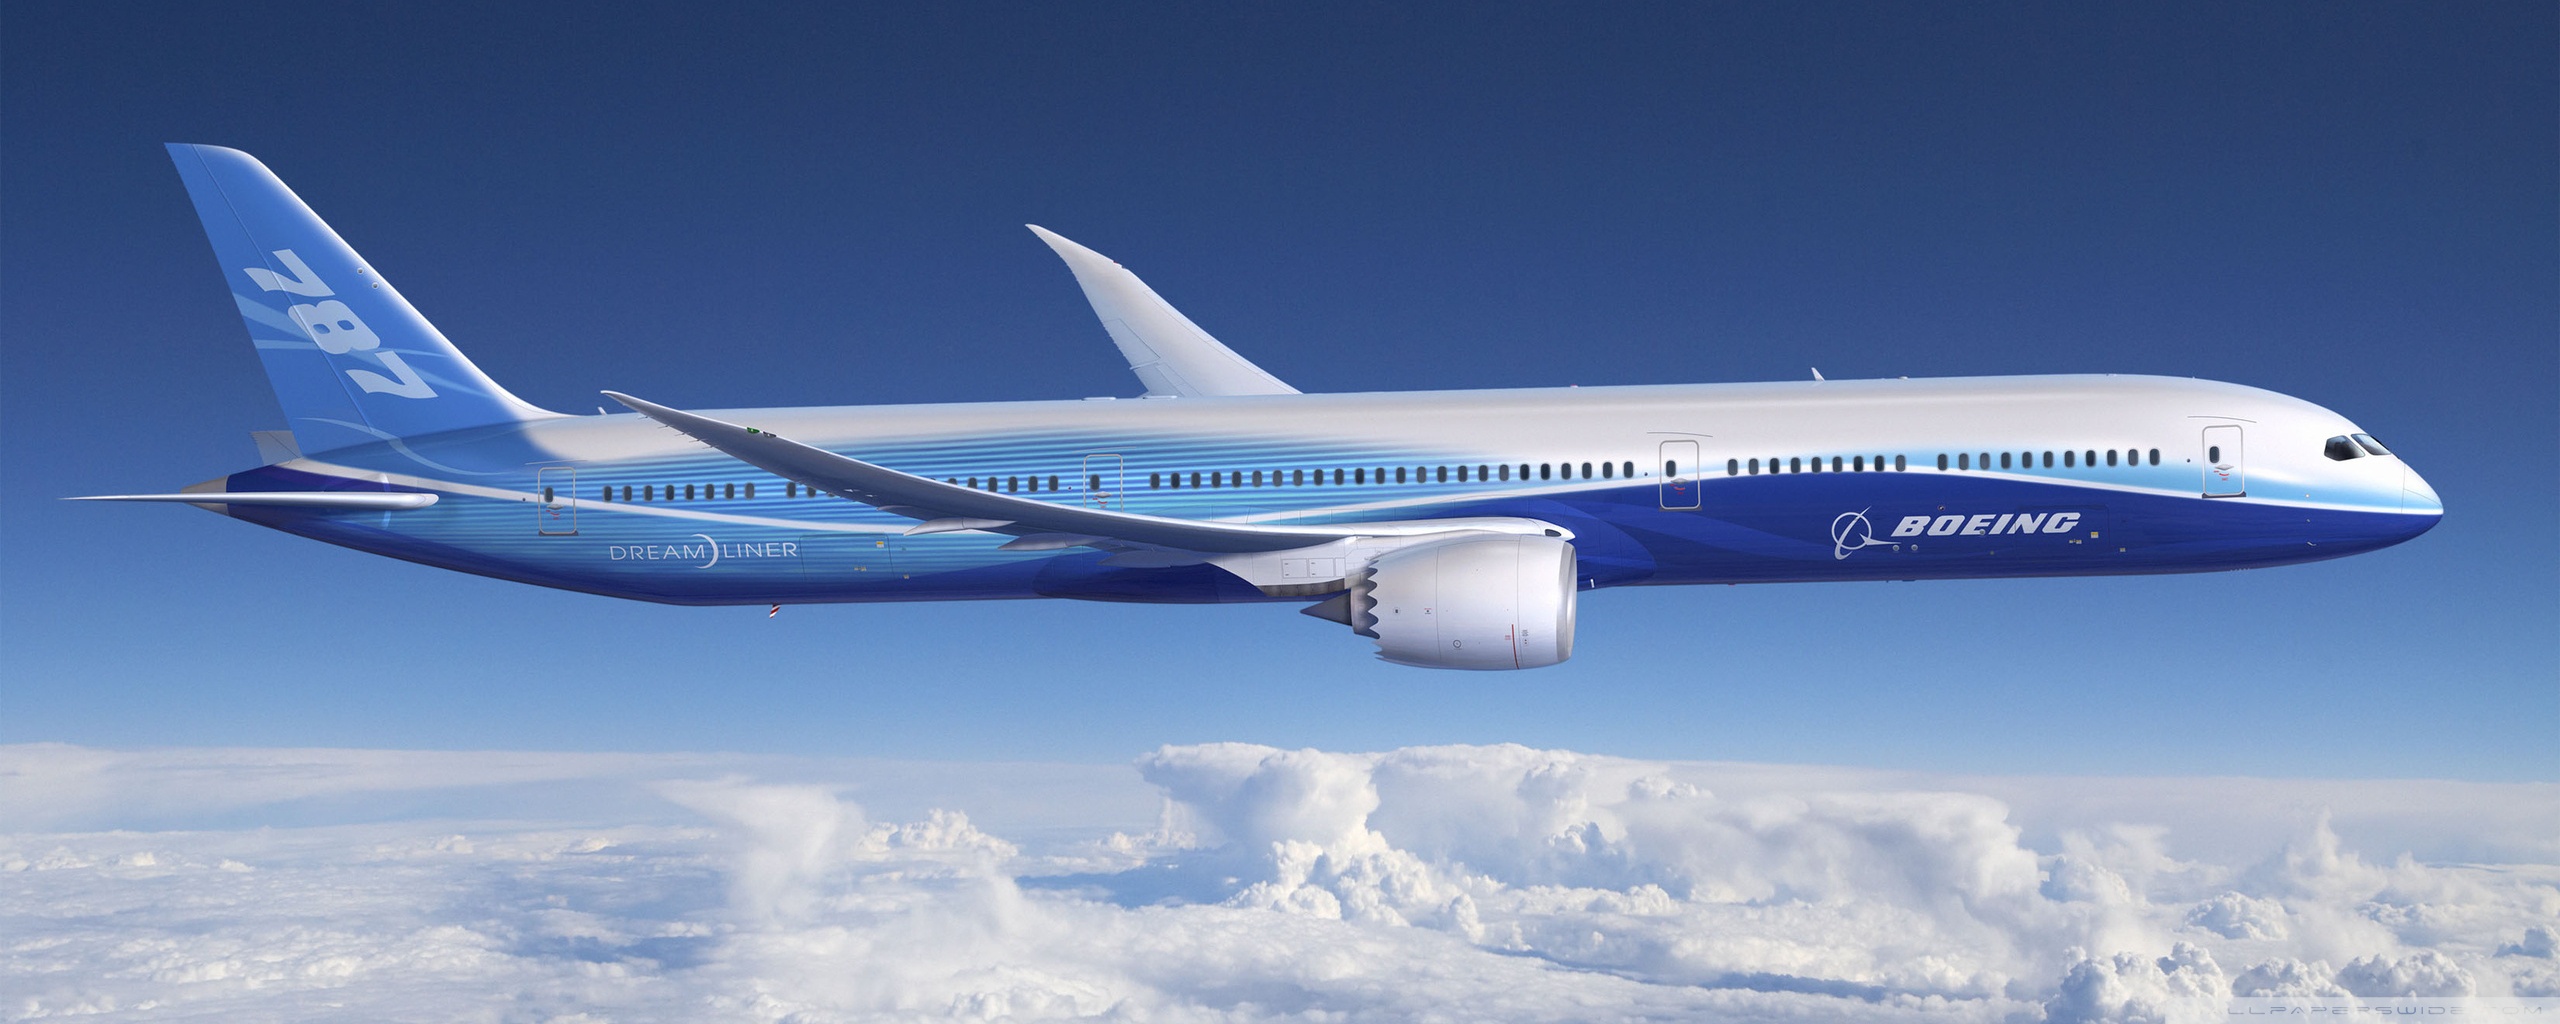 Nice Images Collection: Boeing 787 Desktop Wallpapers